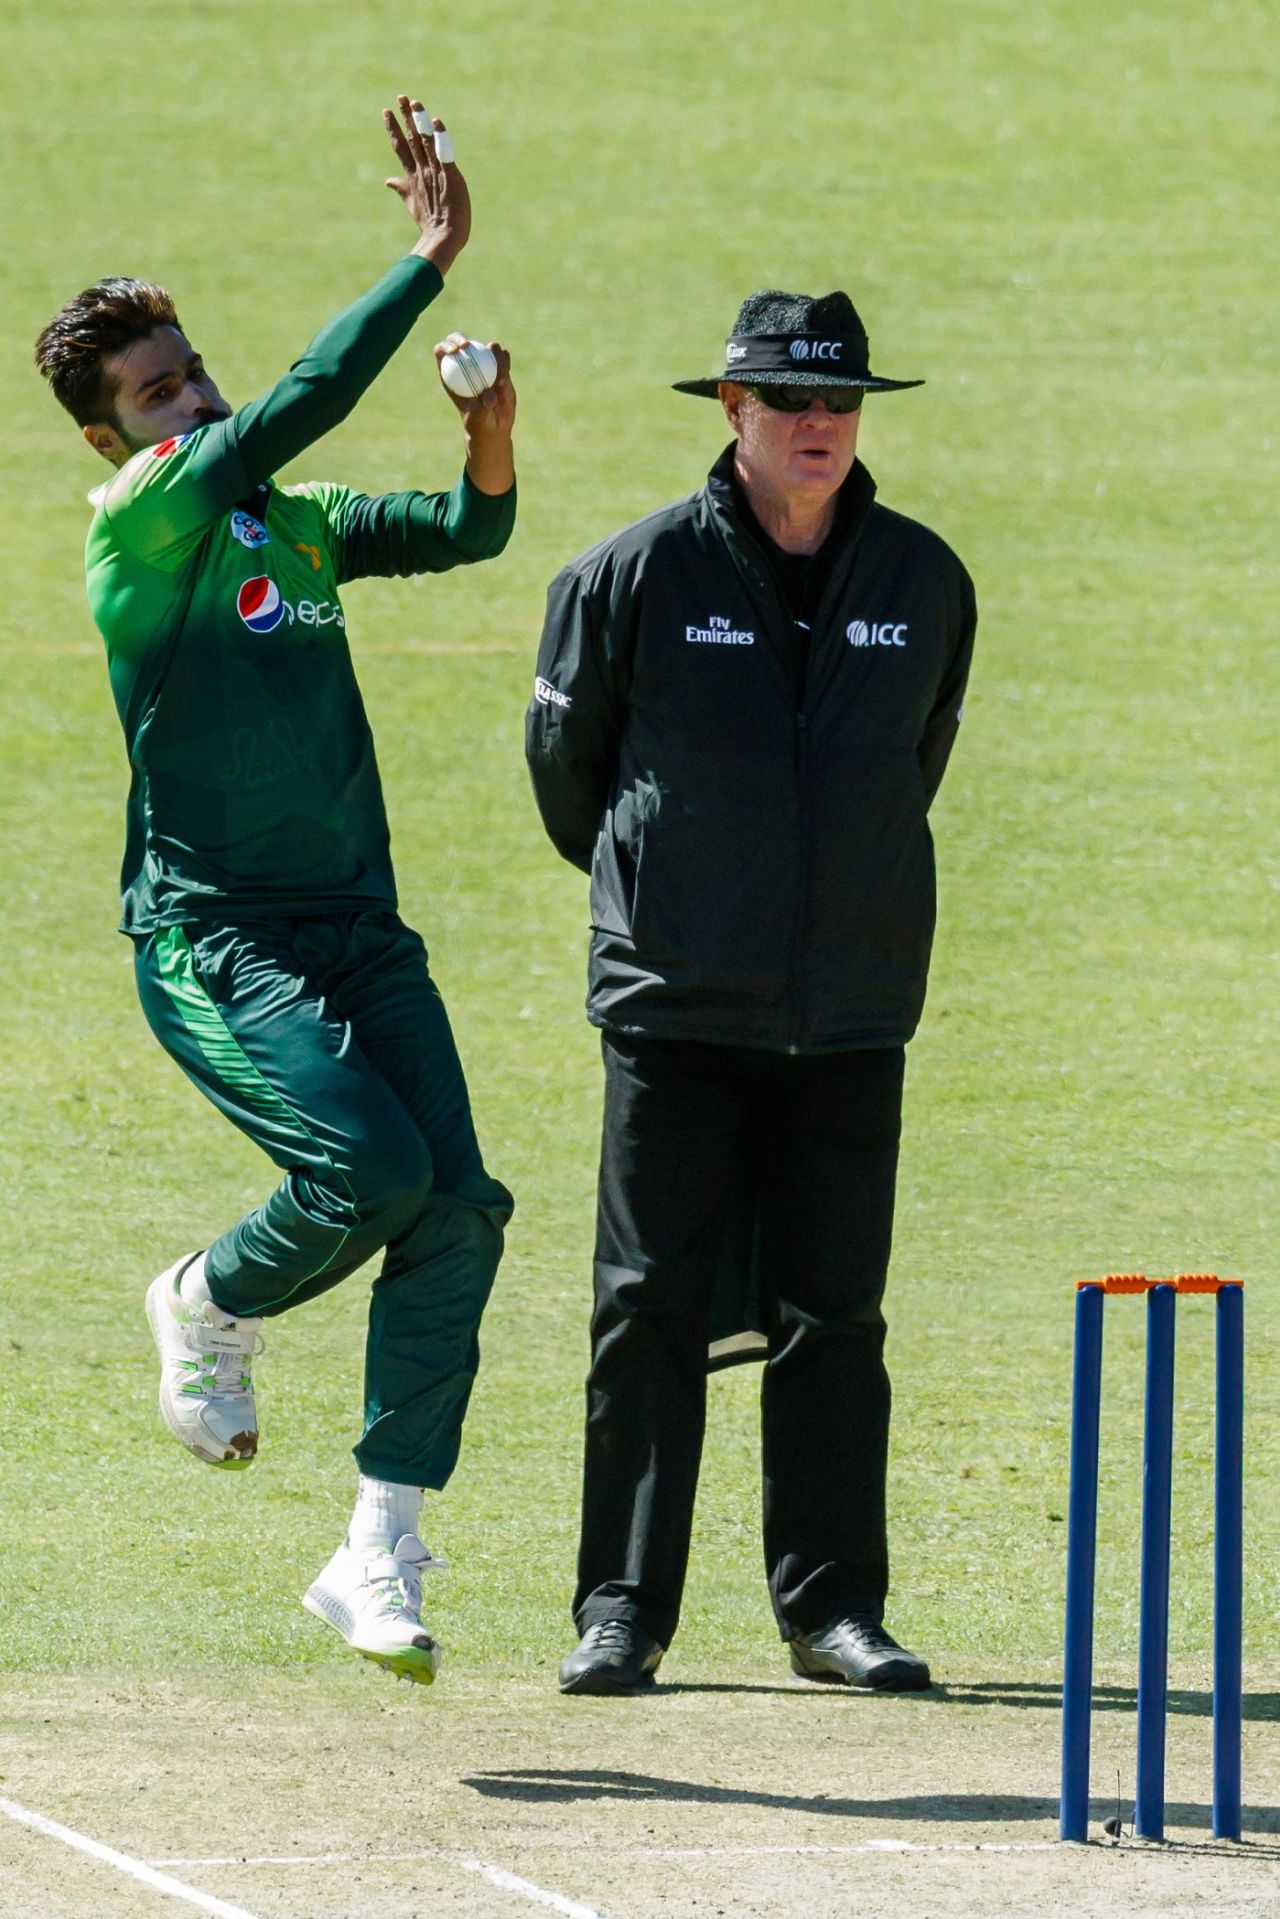 Mohammad Amir delivers a ball past Russel Tiffin, Zimbabwe v Pakistan, 5th ODI, Bulawayo, July 22, 2018